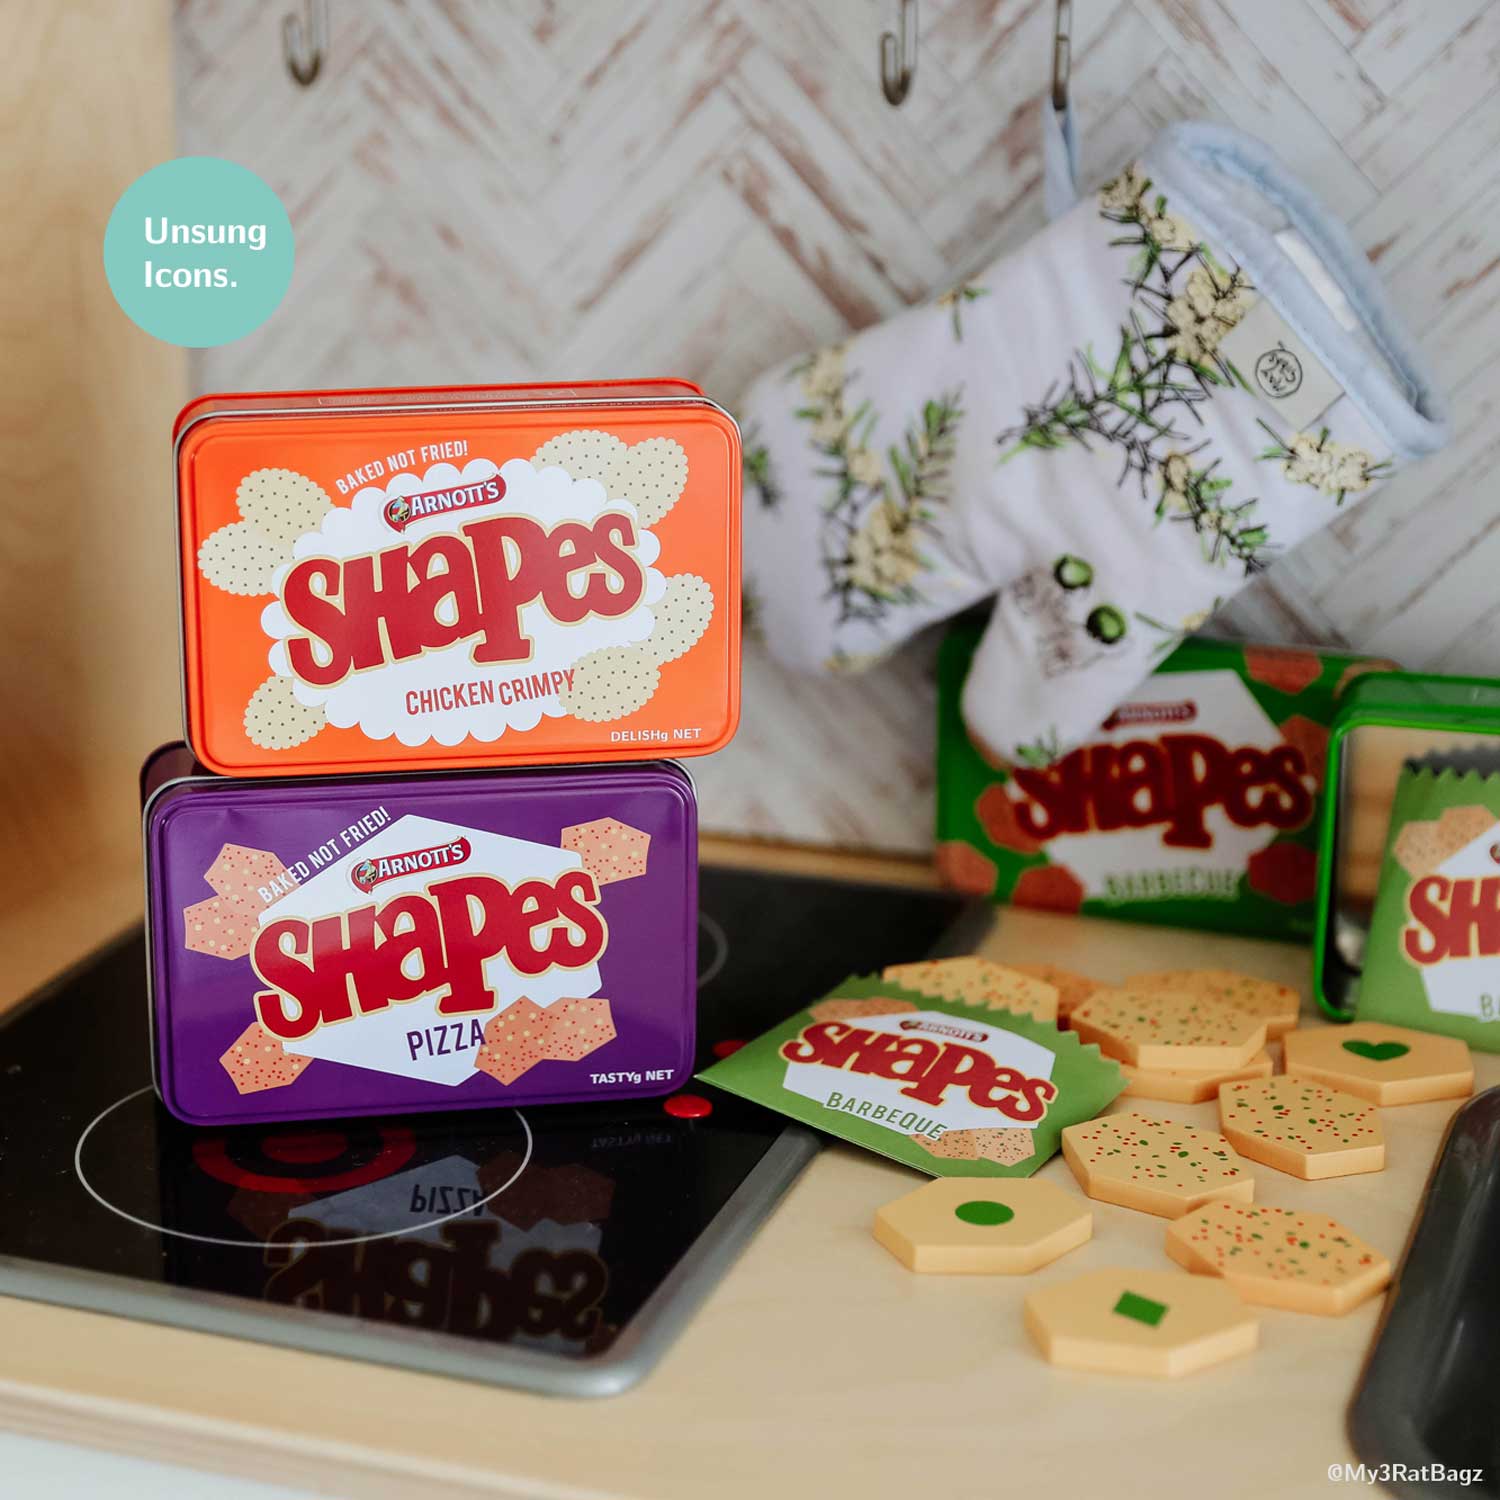 Yum Yum 🍕🍗 Add Arnott's Shapes to your kitchen play!